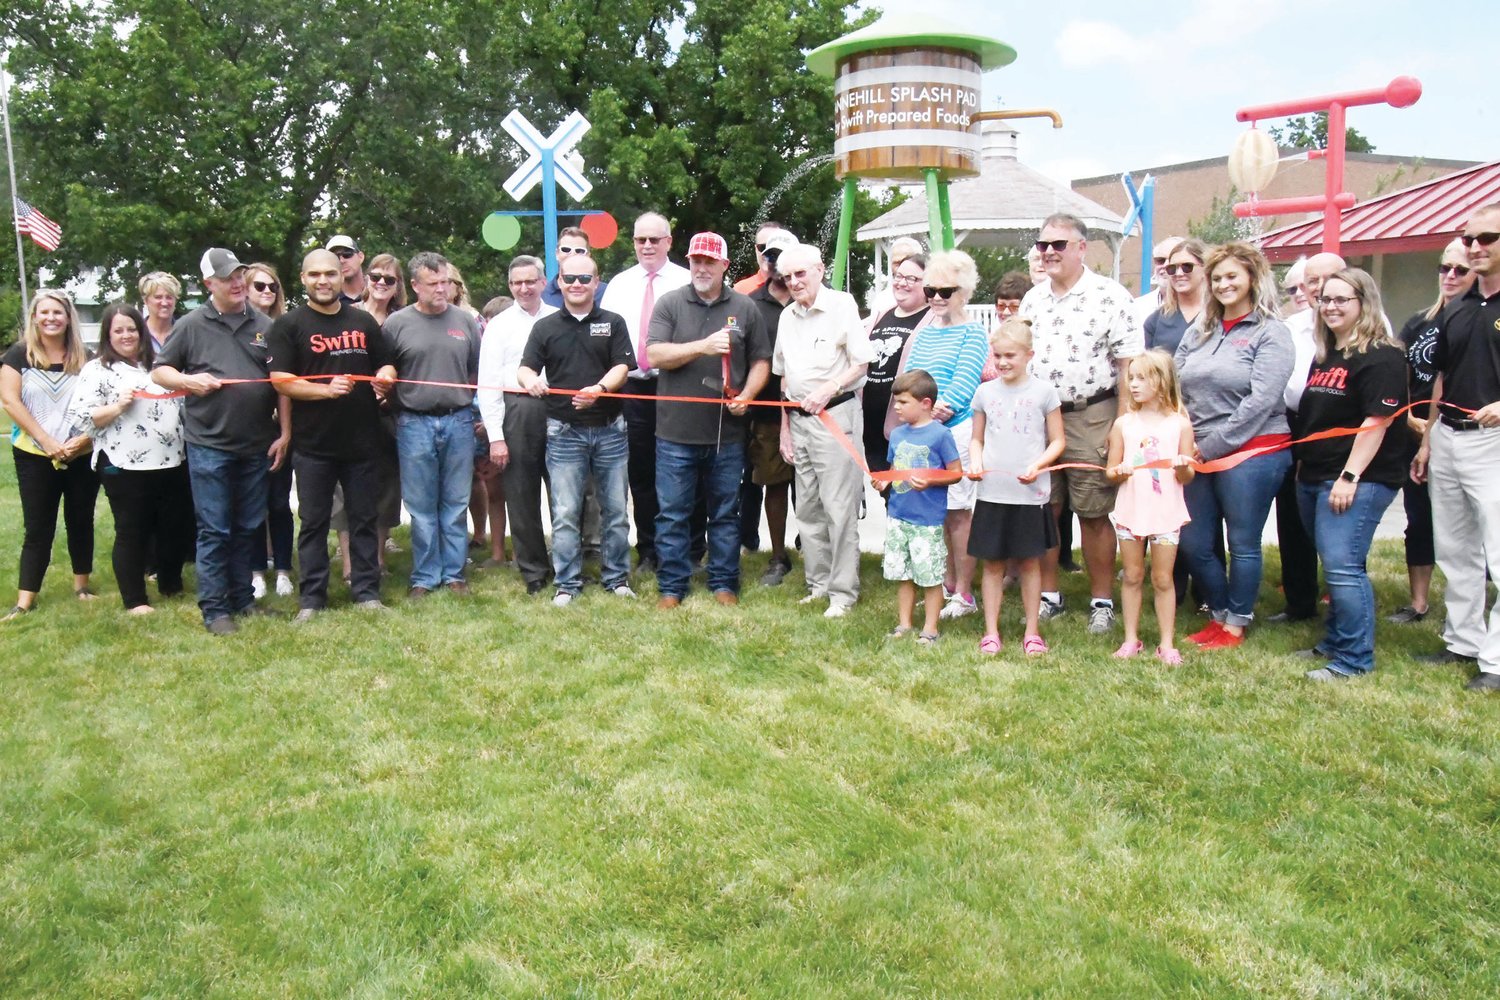 Dignitaries from Moberly city government, the Moberly Parks and Recreation Department and industry were present at the ribbon cutting for the new Tannehill Park Splash Pad.